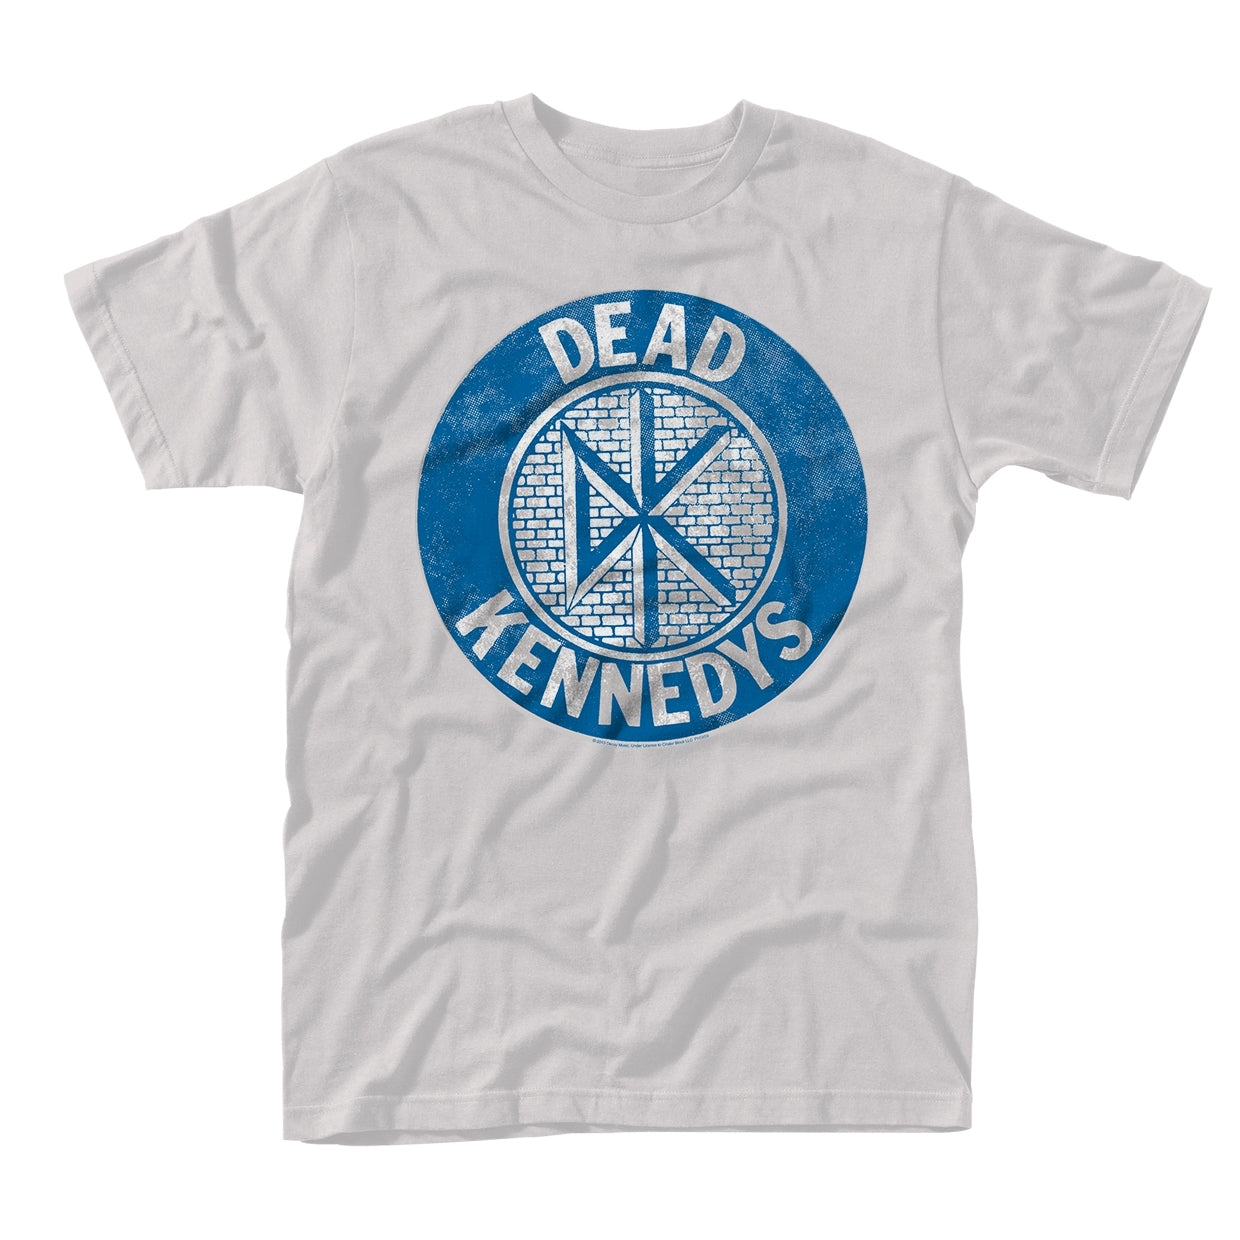 Dead Kennedys "Bedtime For Democracy" T shirt